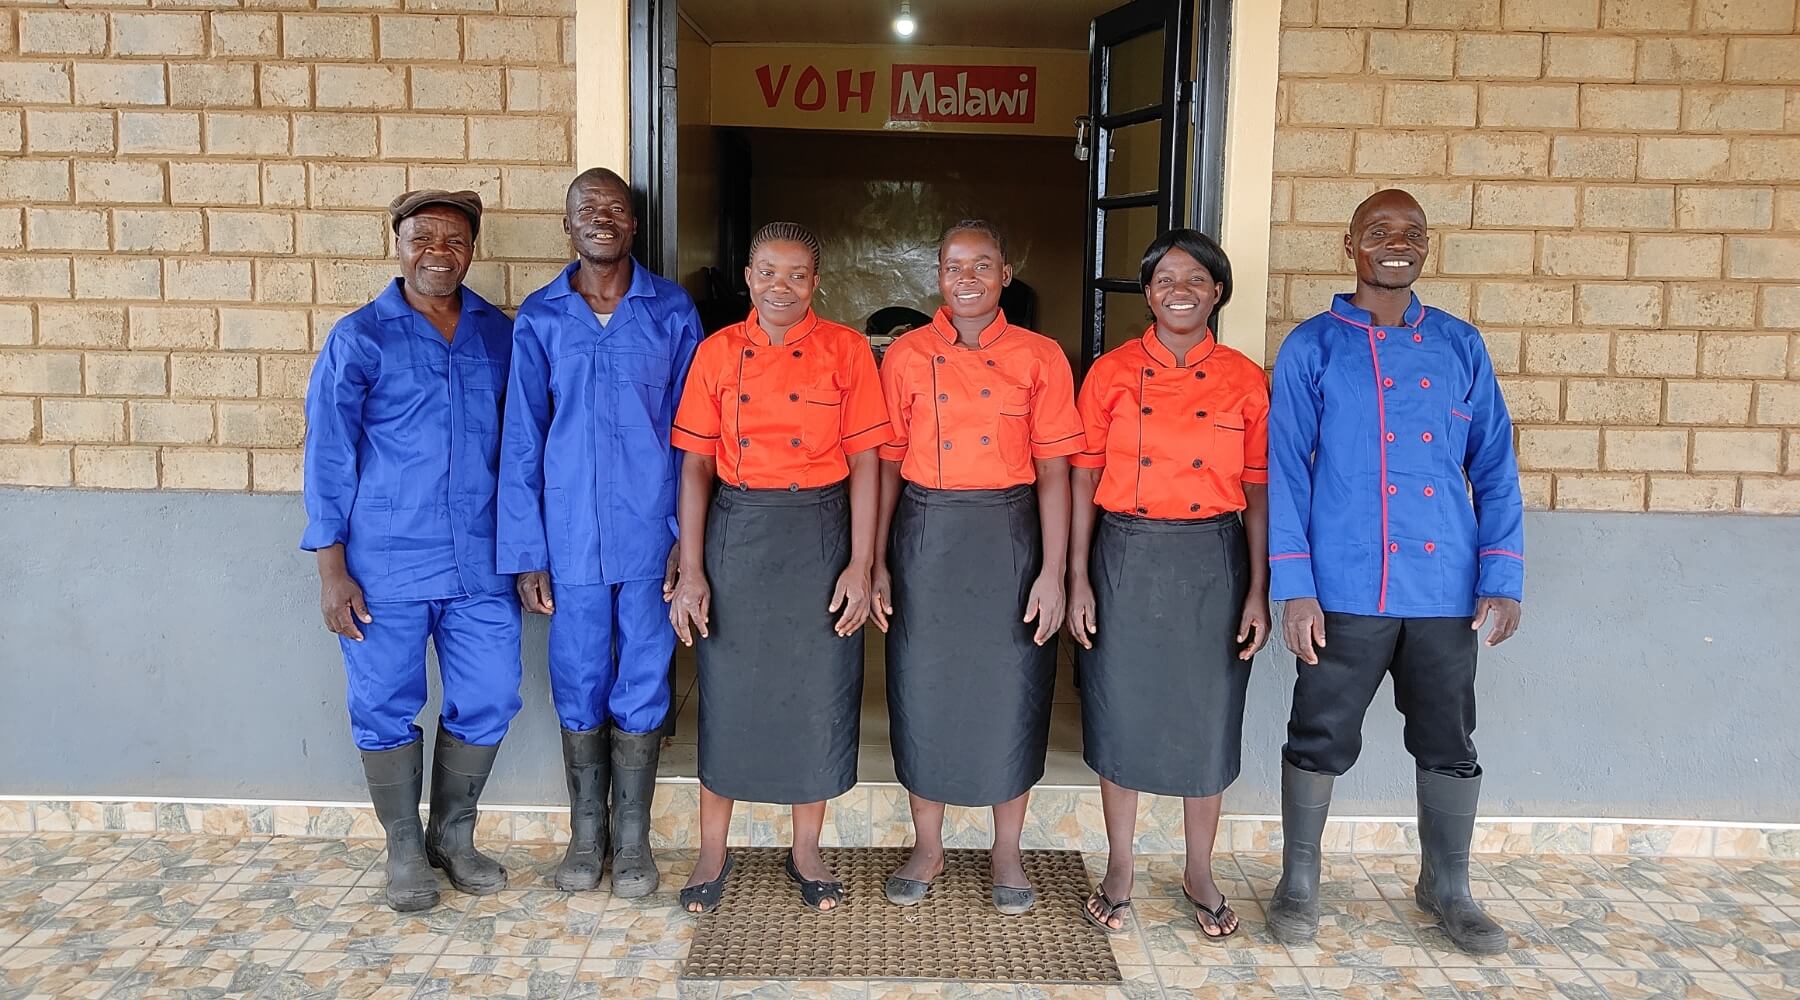 Five staff members standing in the entrance of VOH Malawi, wearing new uniforms and smiling. 